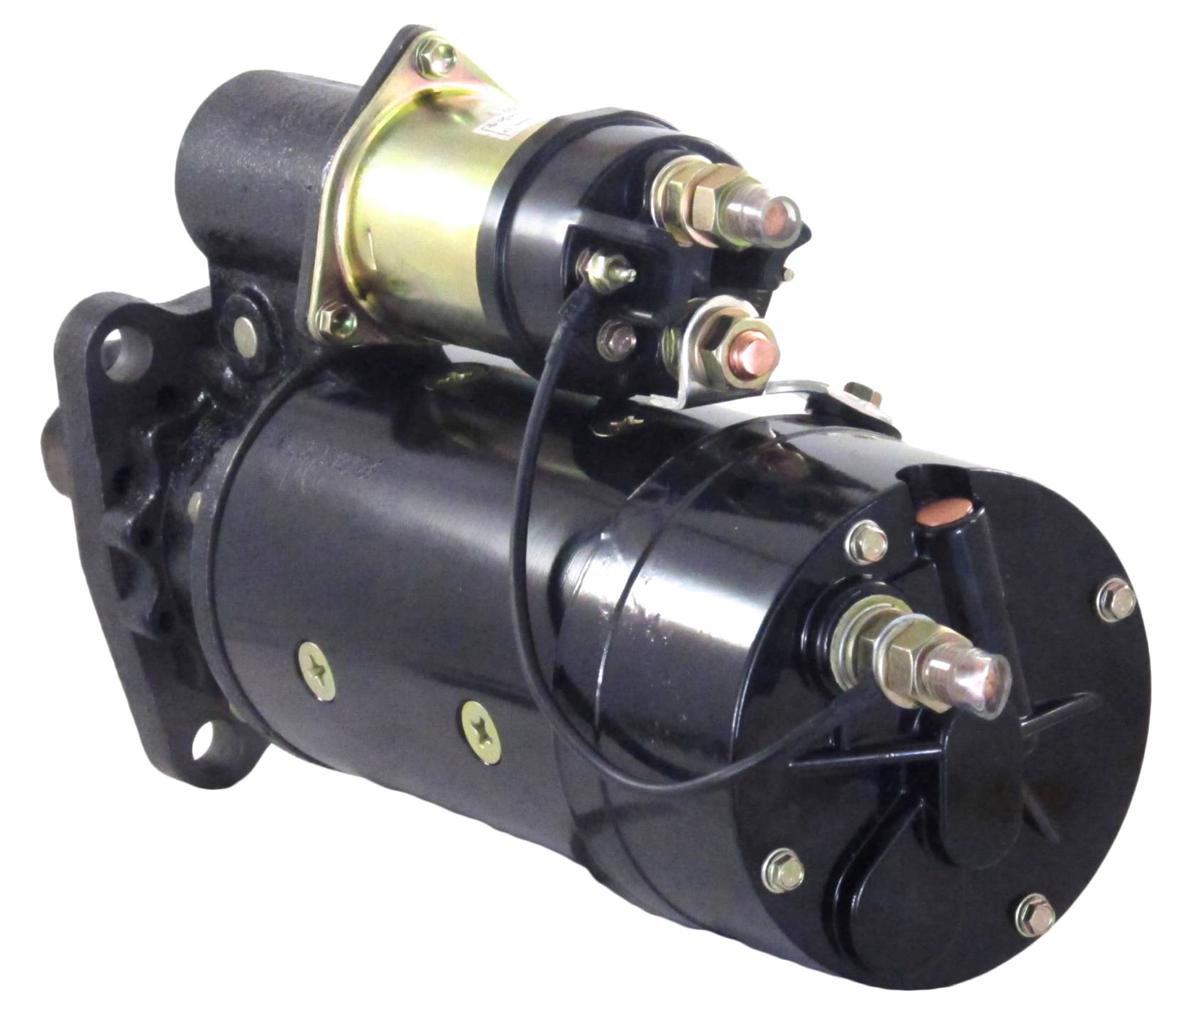 Rareelectrical NEW STARTER MOTOR COMPATIBLE WITH NEW HOLLAND COMBINE TR86 TR96 3208 DIESEL 1990399 1990403